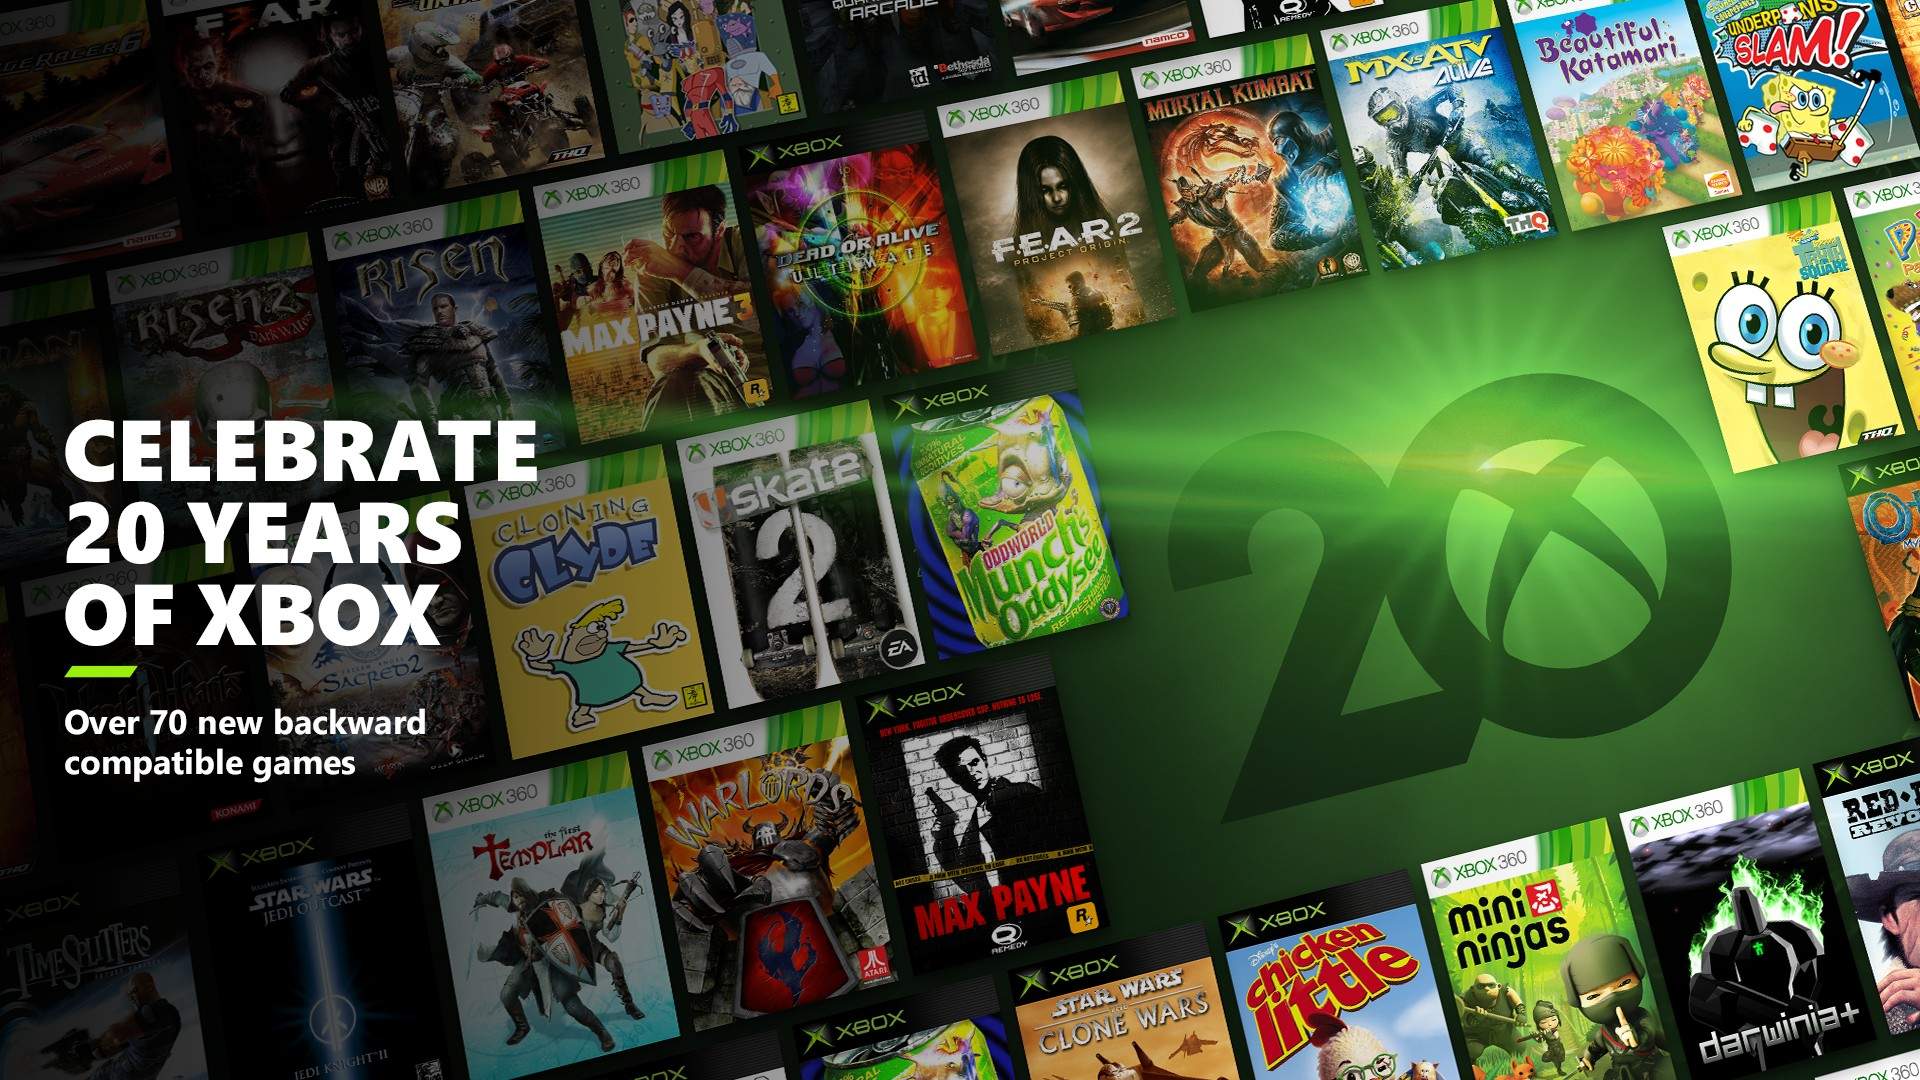 Over 70 New Games Added To Xbox One Backward Compatibility Program